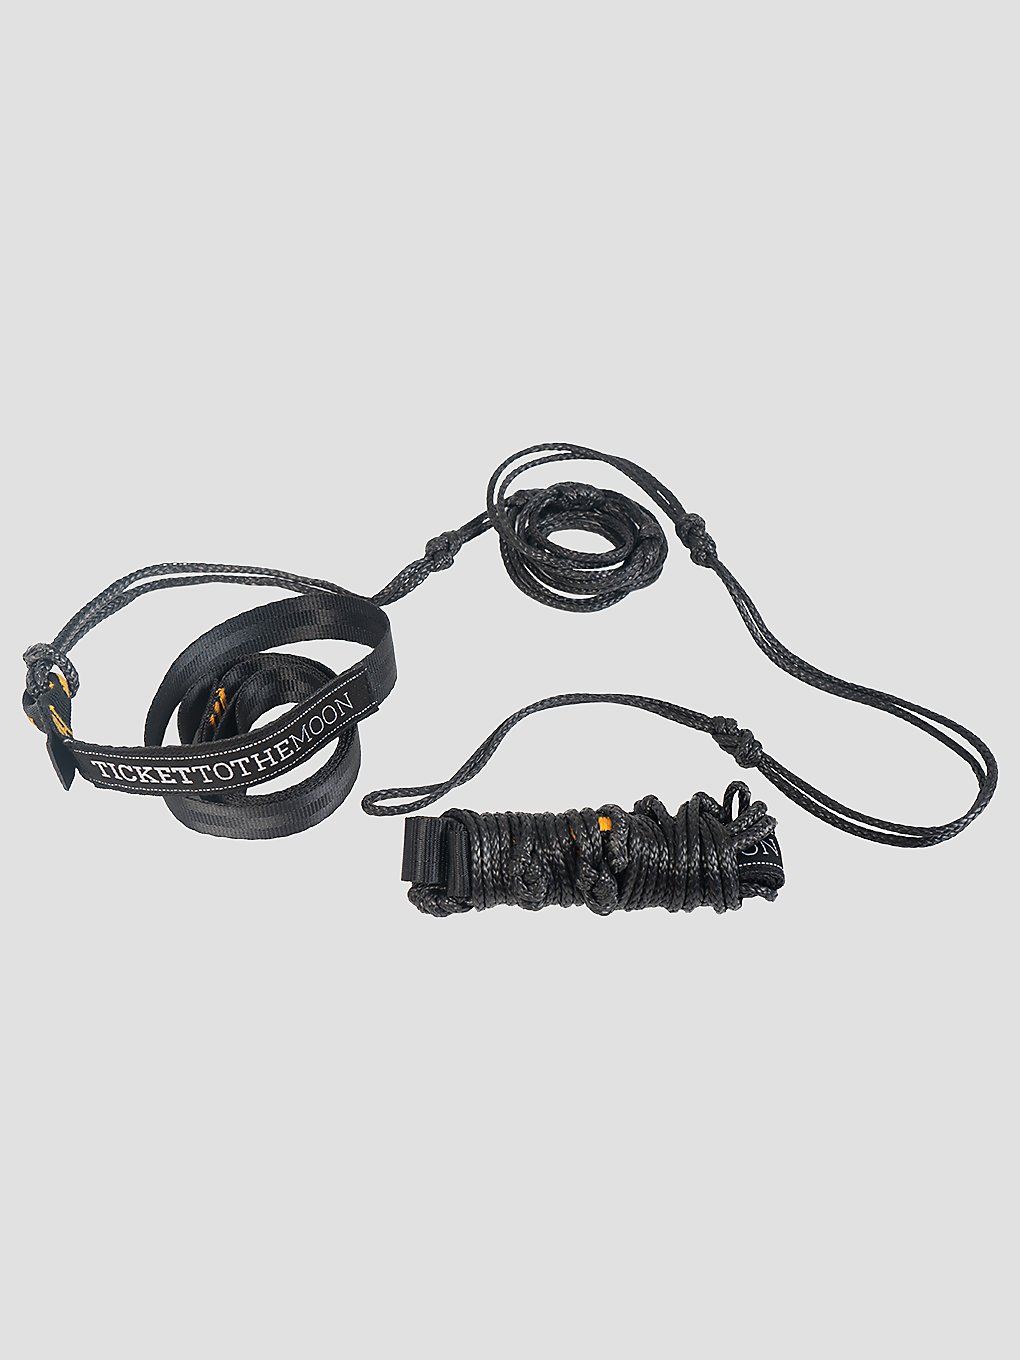 Ticket To The Moon Lightest 1 Set of two UHMPE ropes with 2 Str black